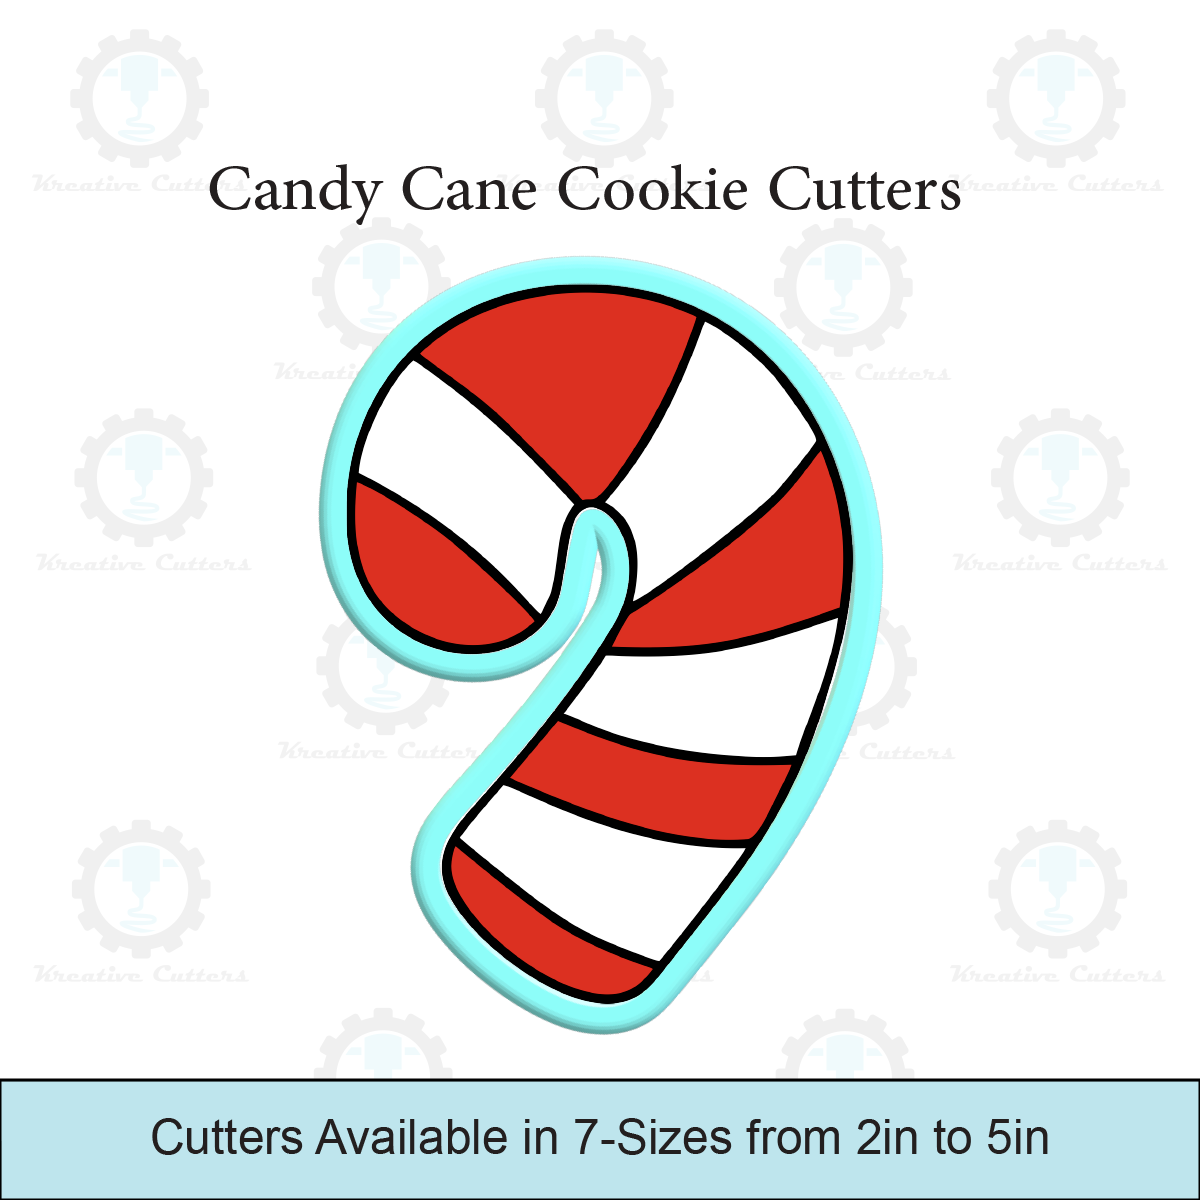 Candy Cane Cookie Cutters